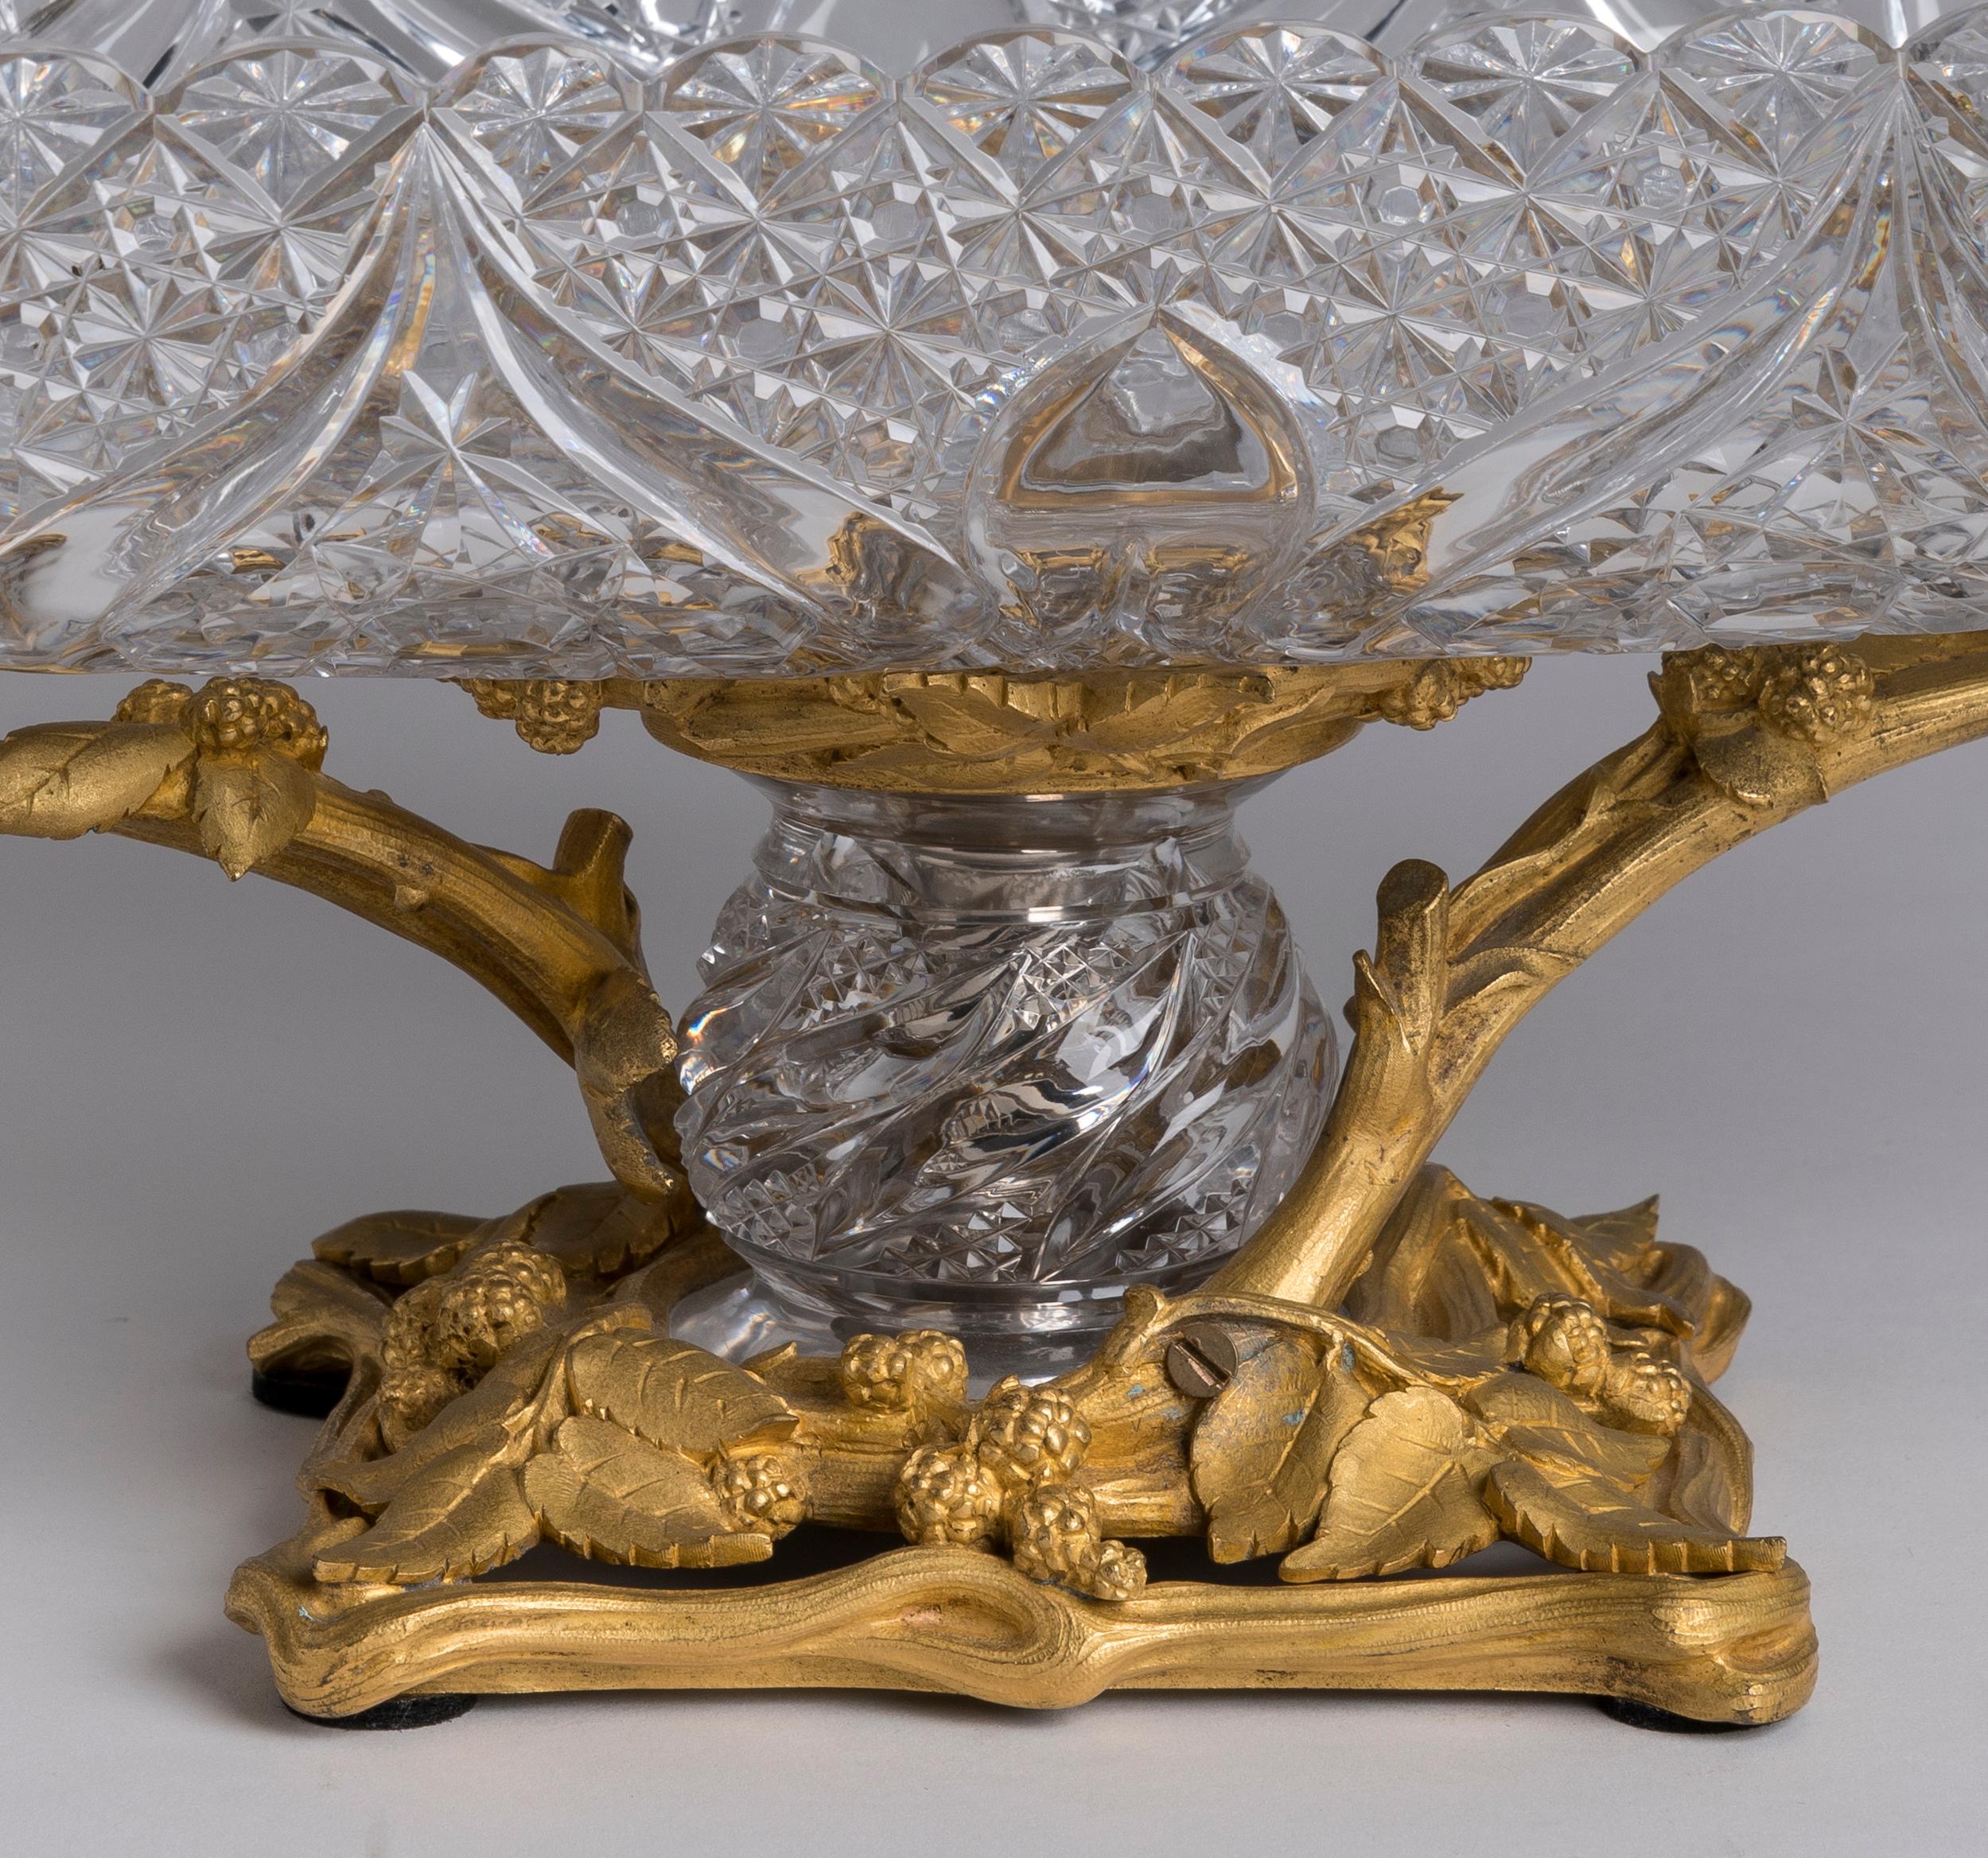 19th Century French Ormolu-Mounted Crystal Centrepiece attributed to Baccarat For Sale 2